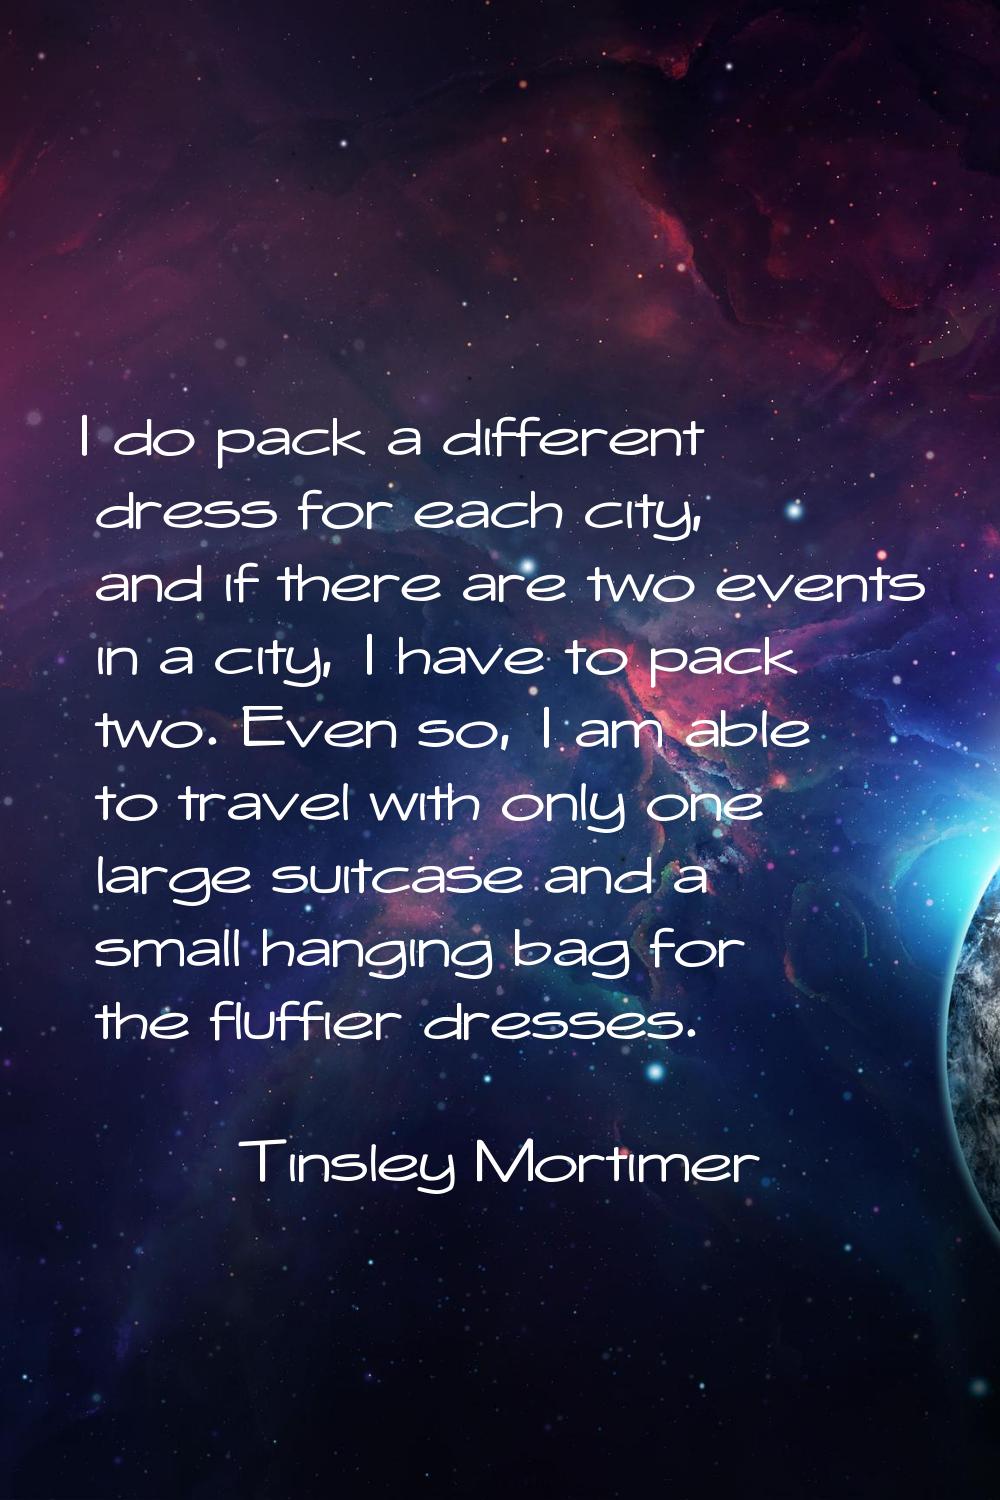 I do pack a different dress for each city, and if there are two events in a city, I have to pack tw